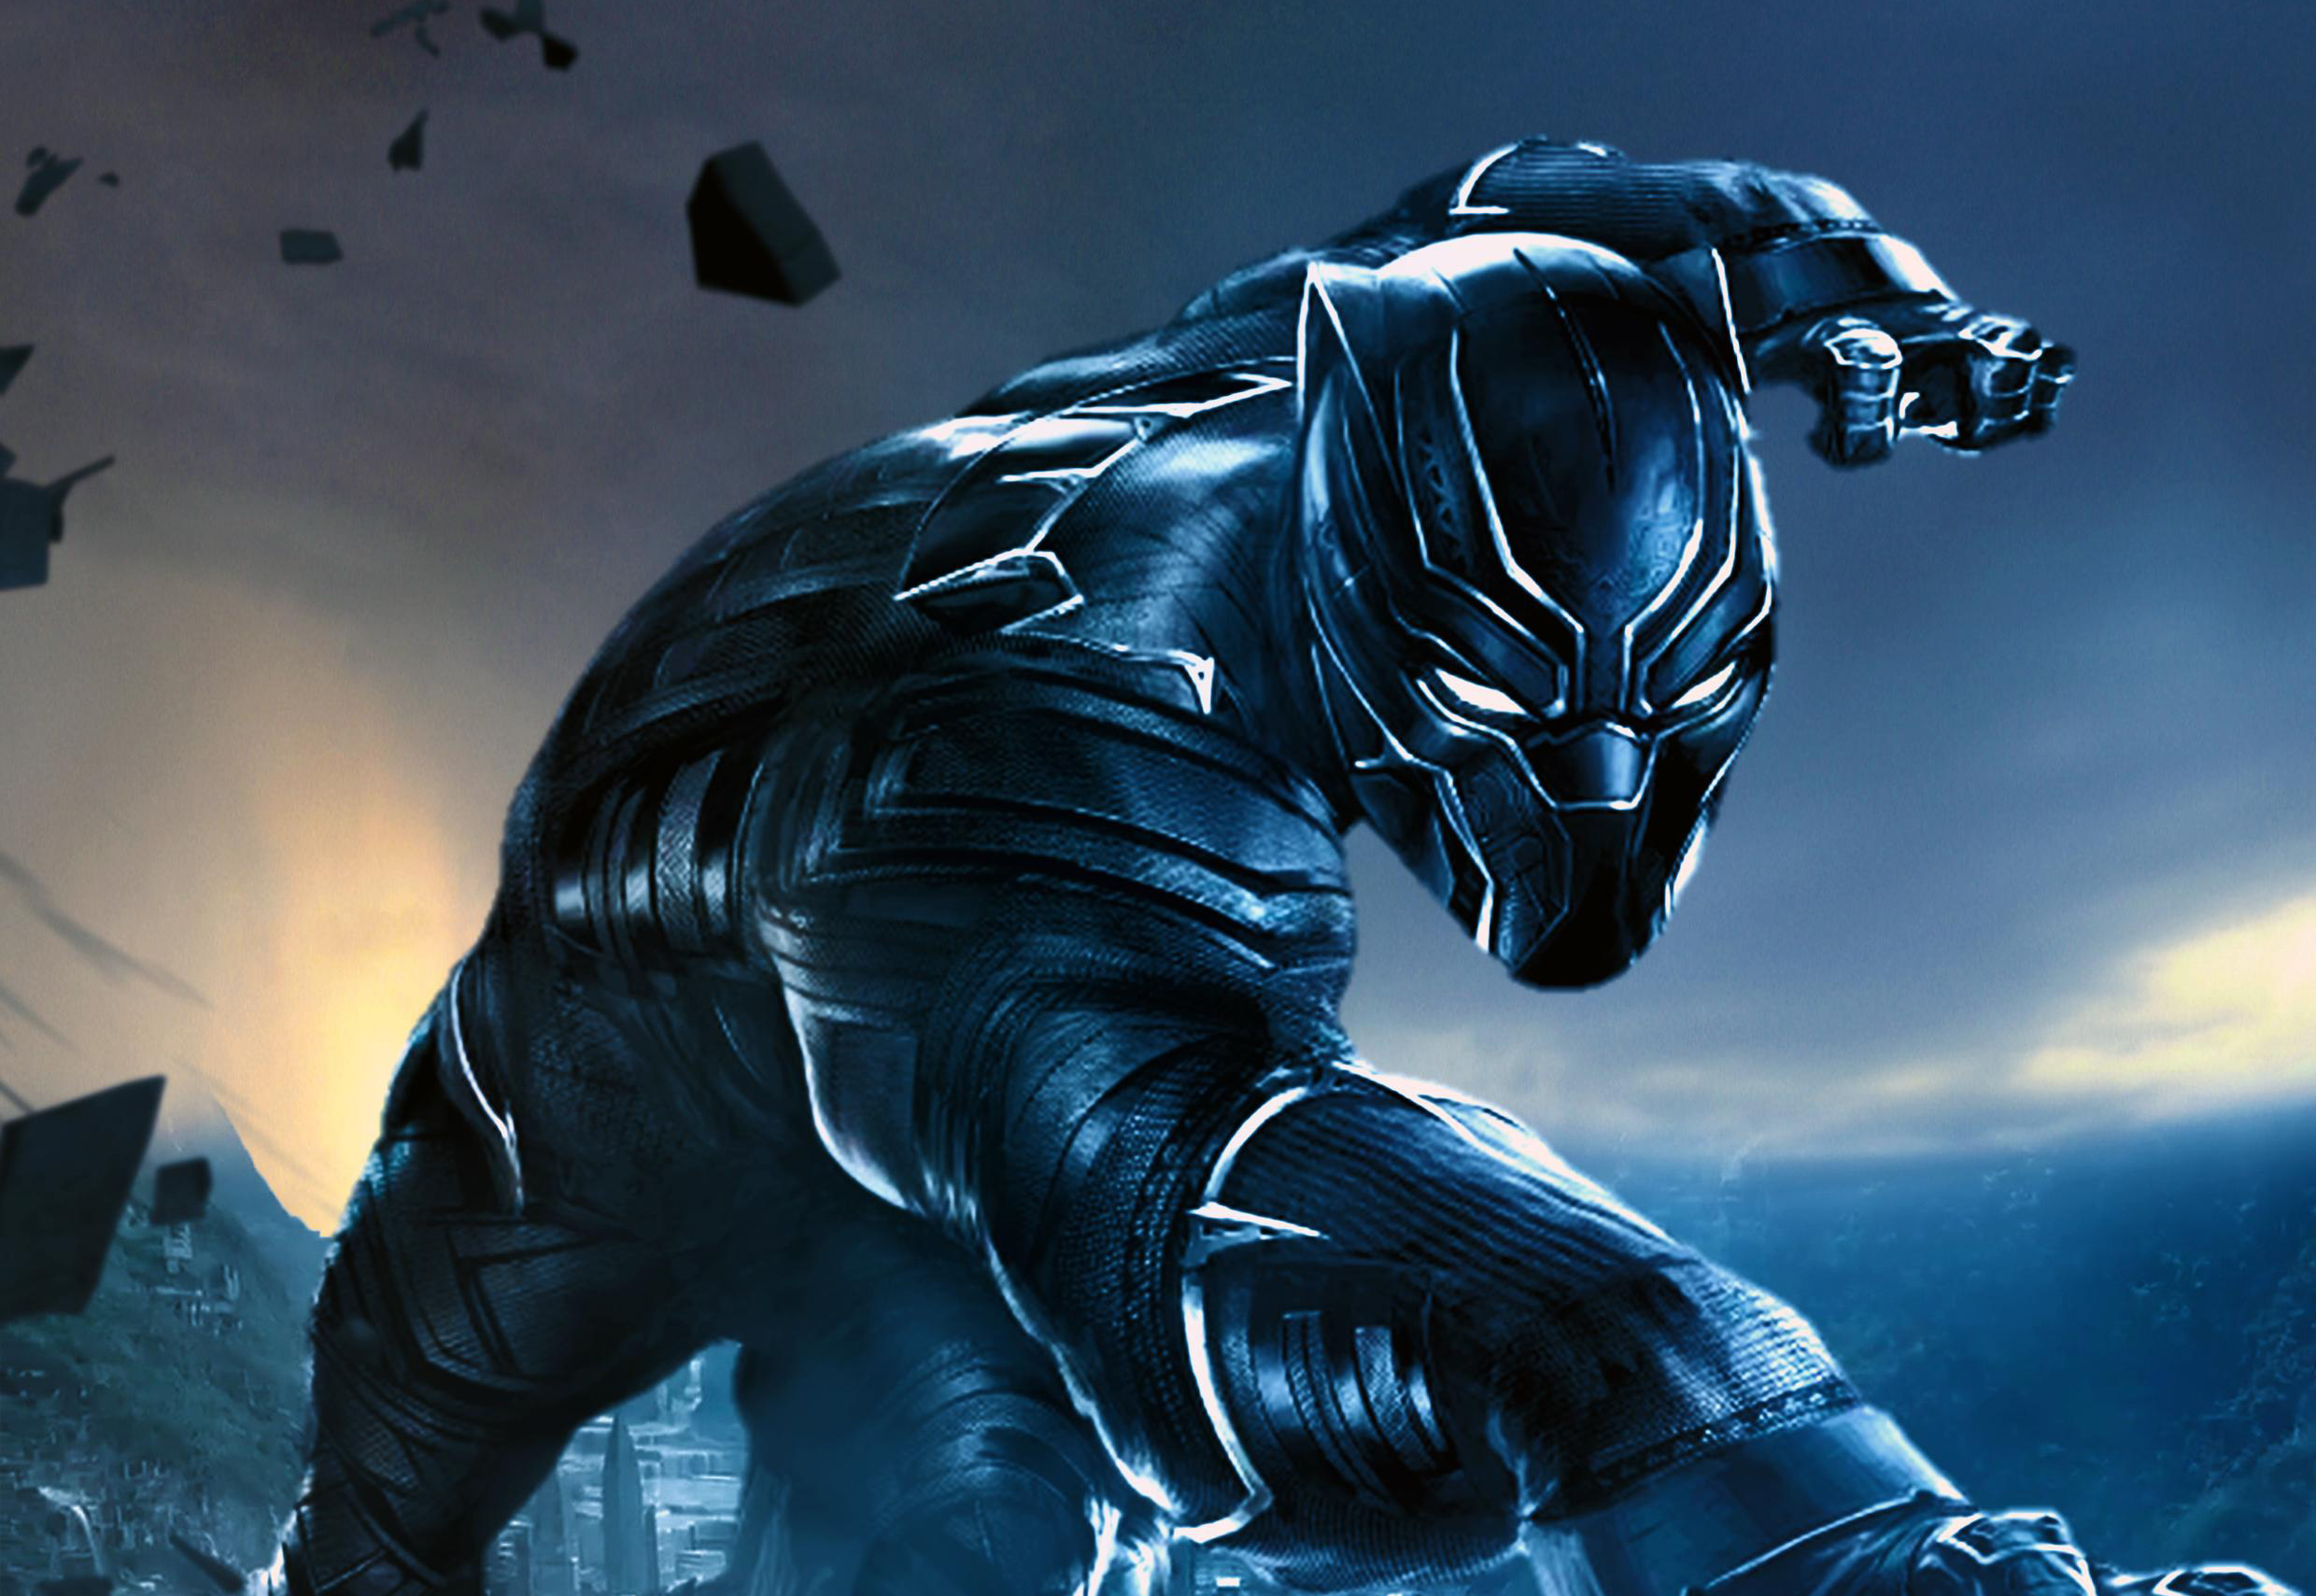 Awesome Wonderful【Black Panther Wallpaper】& Picture Can't Get